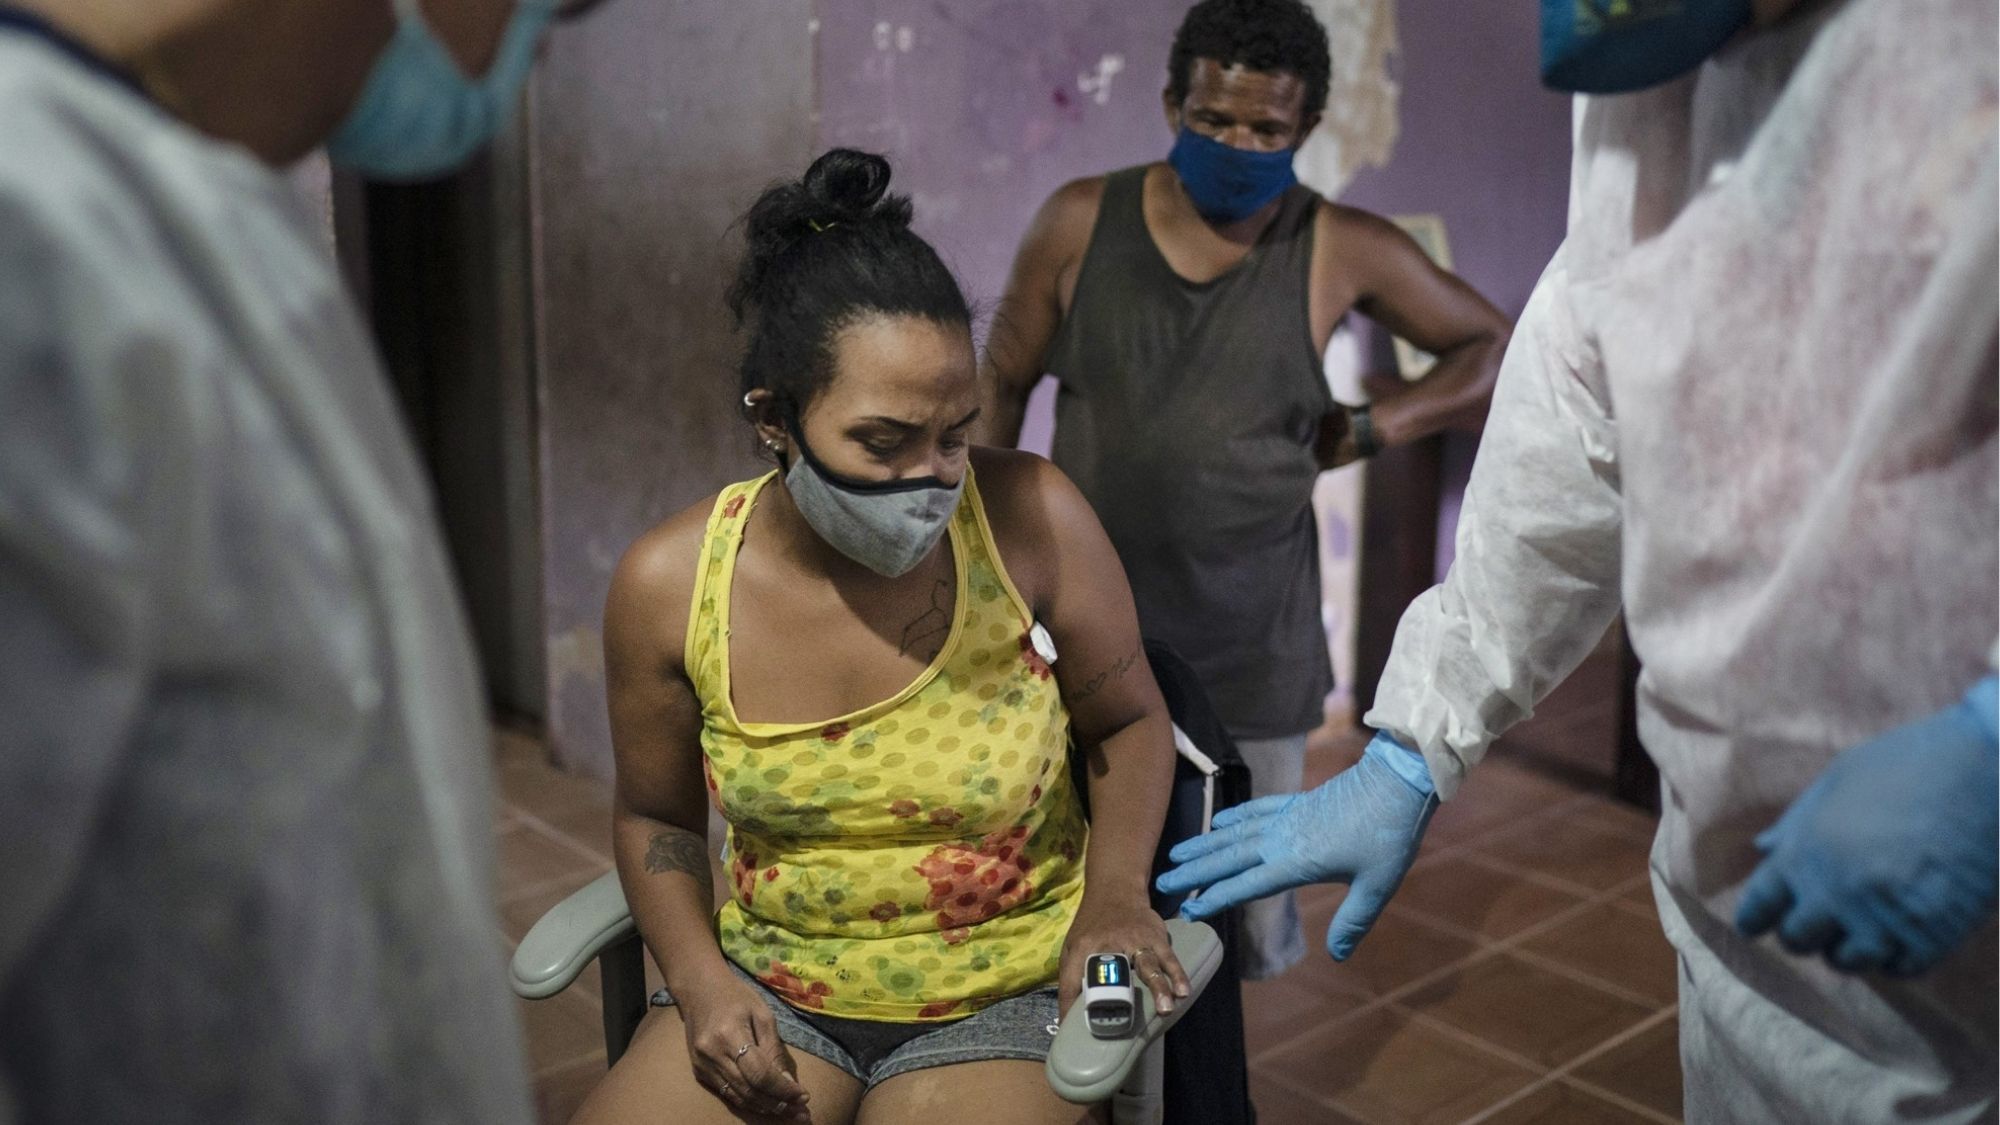  Experts say Brazil doomed because of government’s poor pandemic response